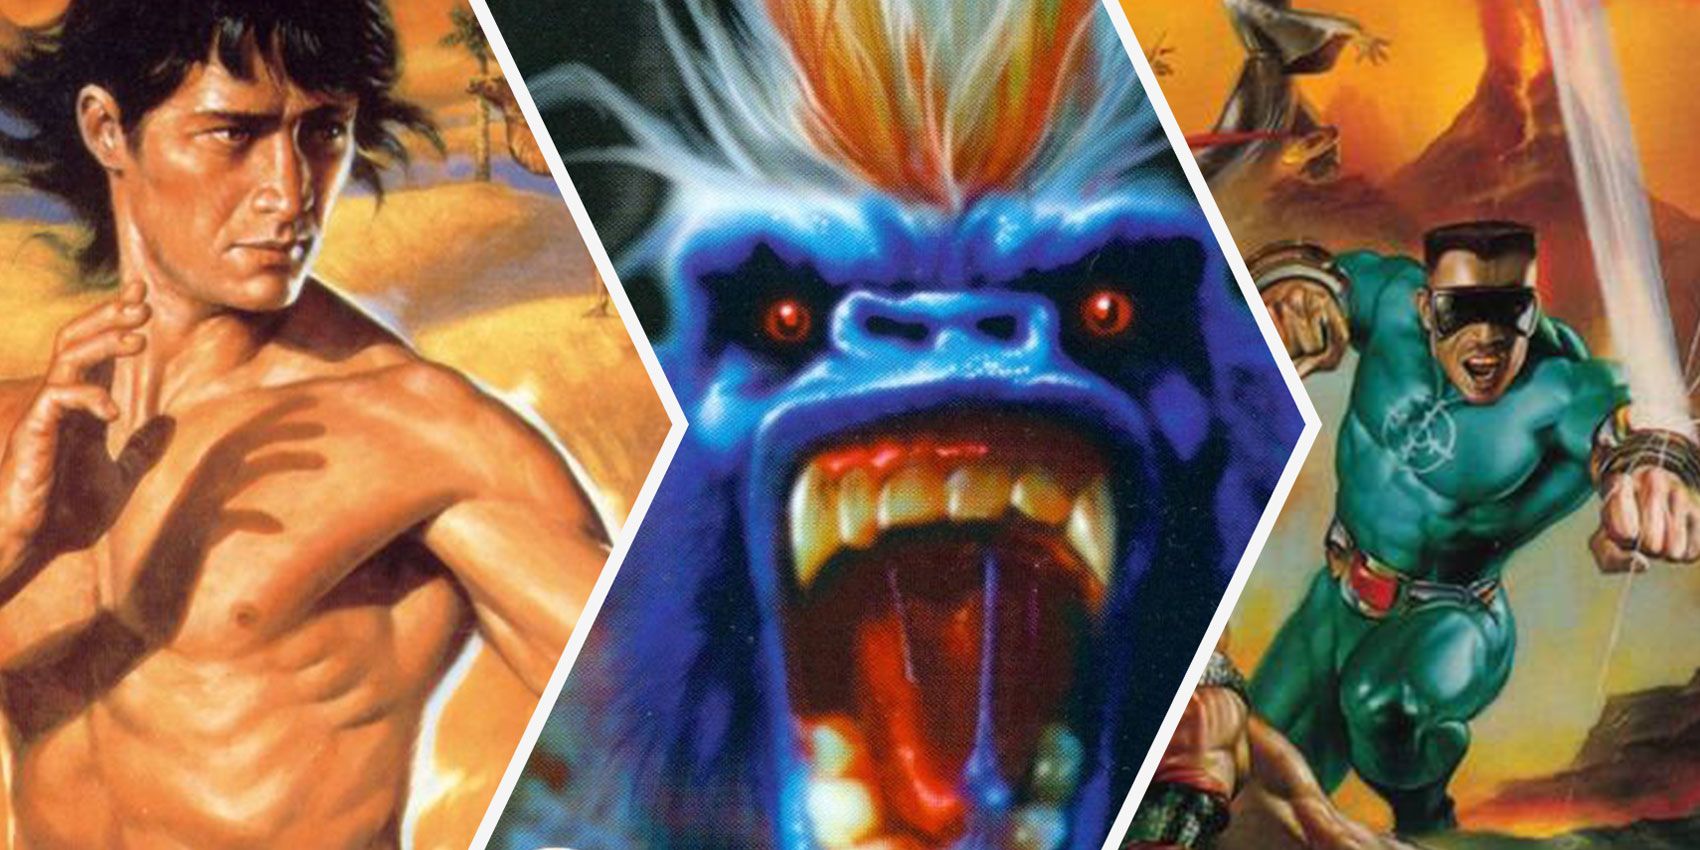 15 Mortal Kombat Knock-Offs That Missed the Mark (And 5 That Are Kinda Kool)